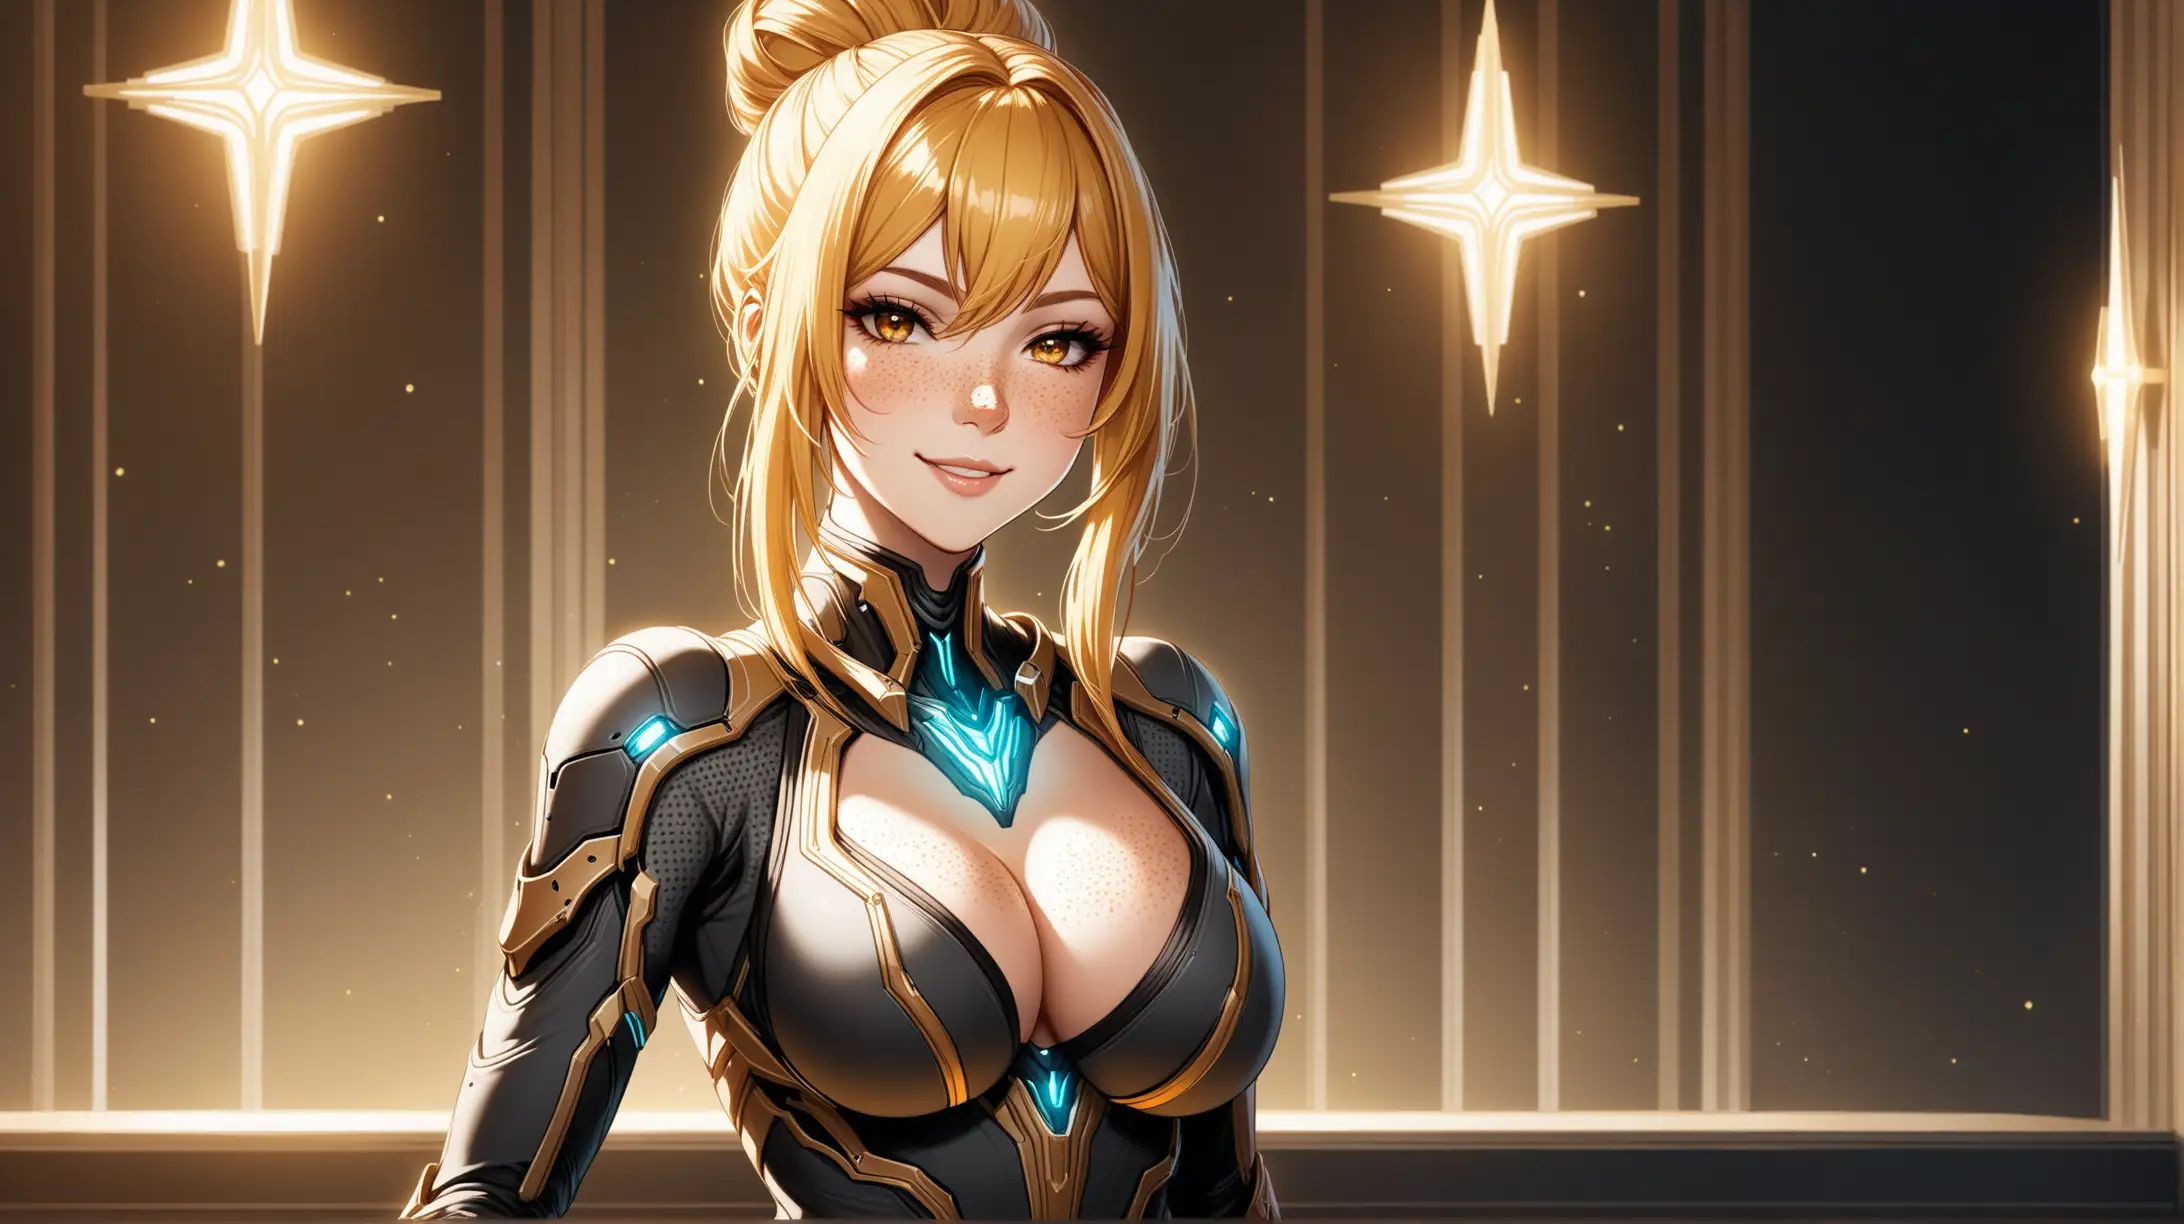 Draw a woman, long blonde hair in a bun, gold eyes, freckles, perky figure, outfit inspired from the game Warframe, high quality, cowboy shot, indoors, seductive pose, cleavage, natural lighting, smiling at the viewer